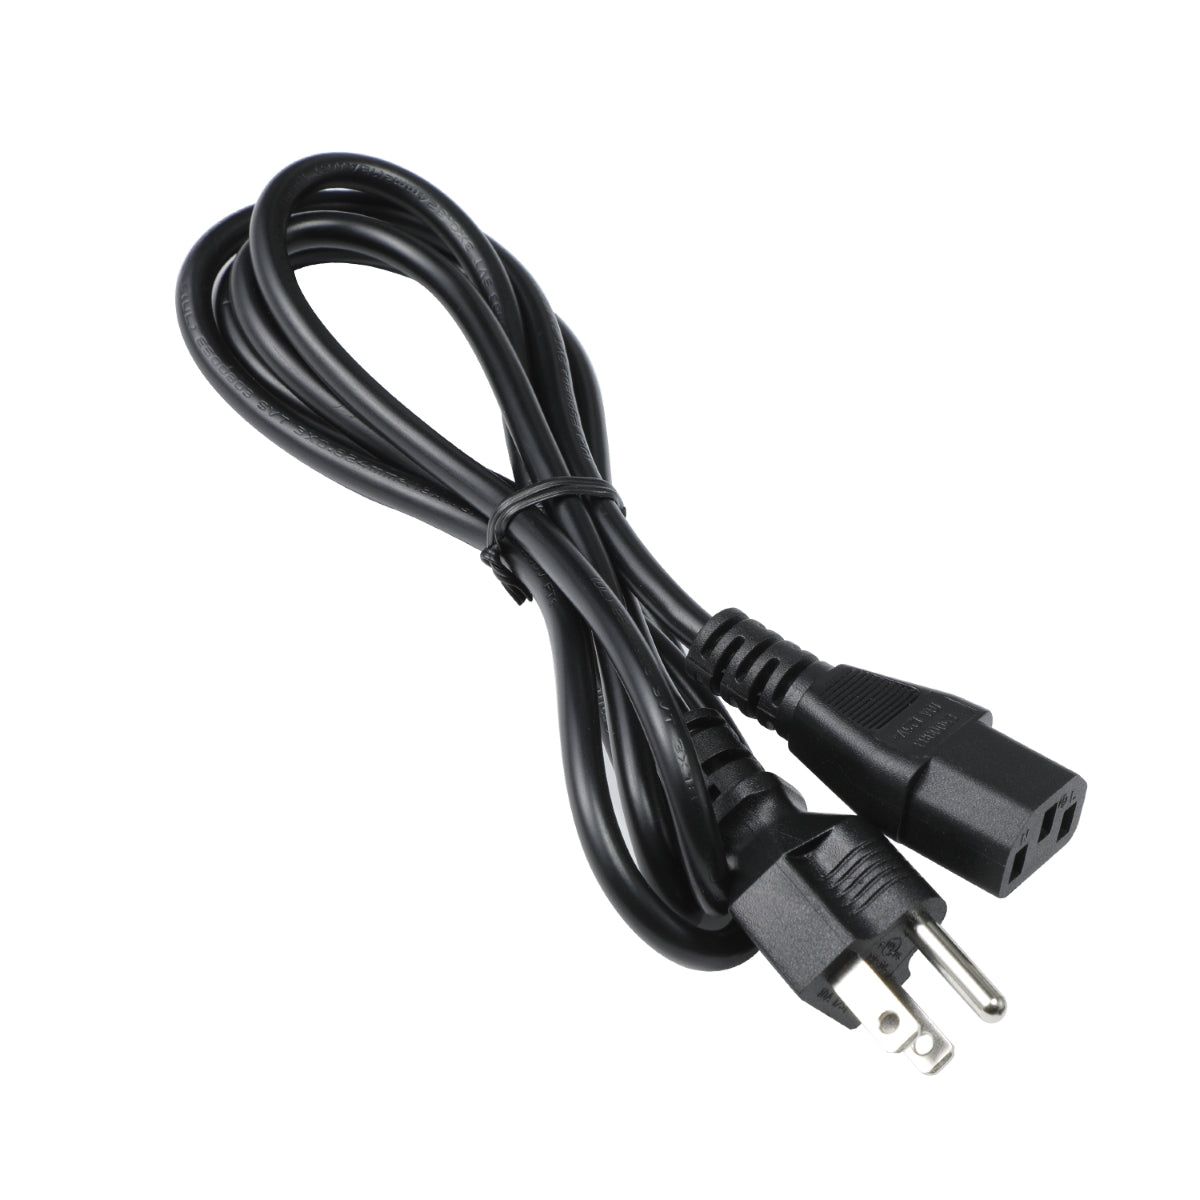 Power Cord for ViewSonic VG2748 Display